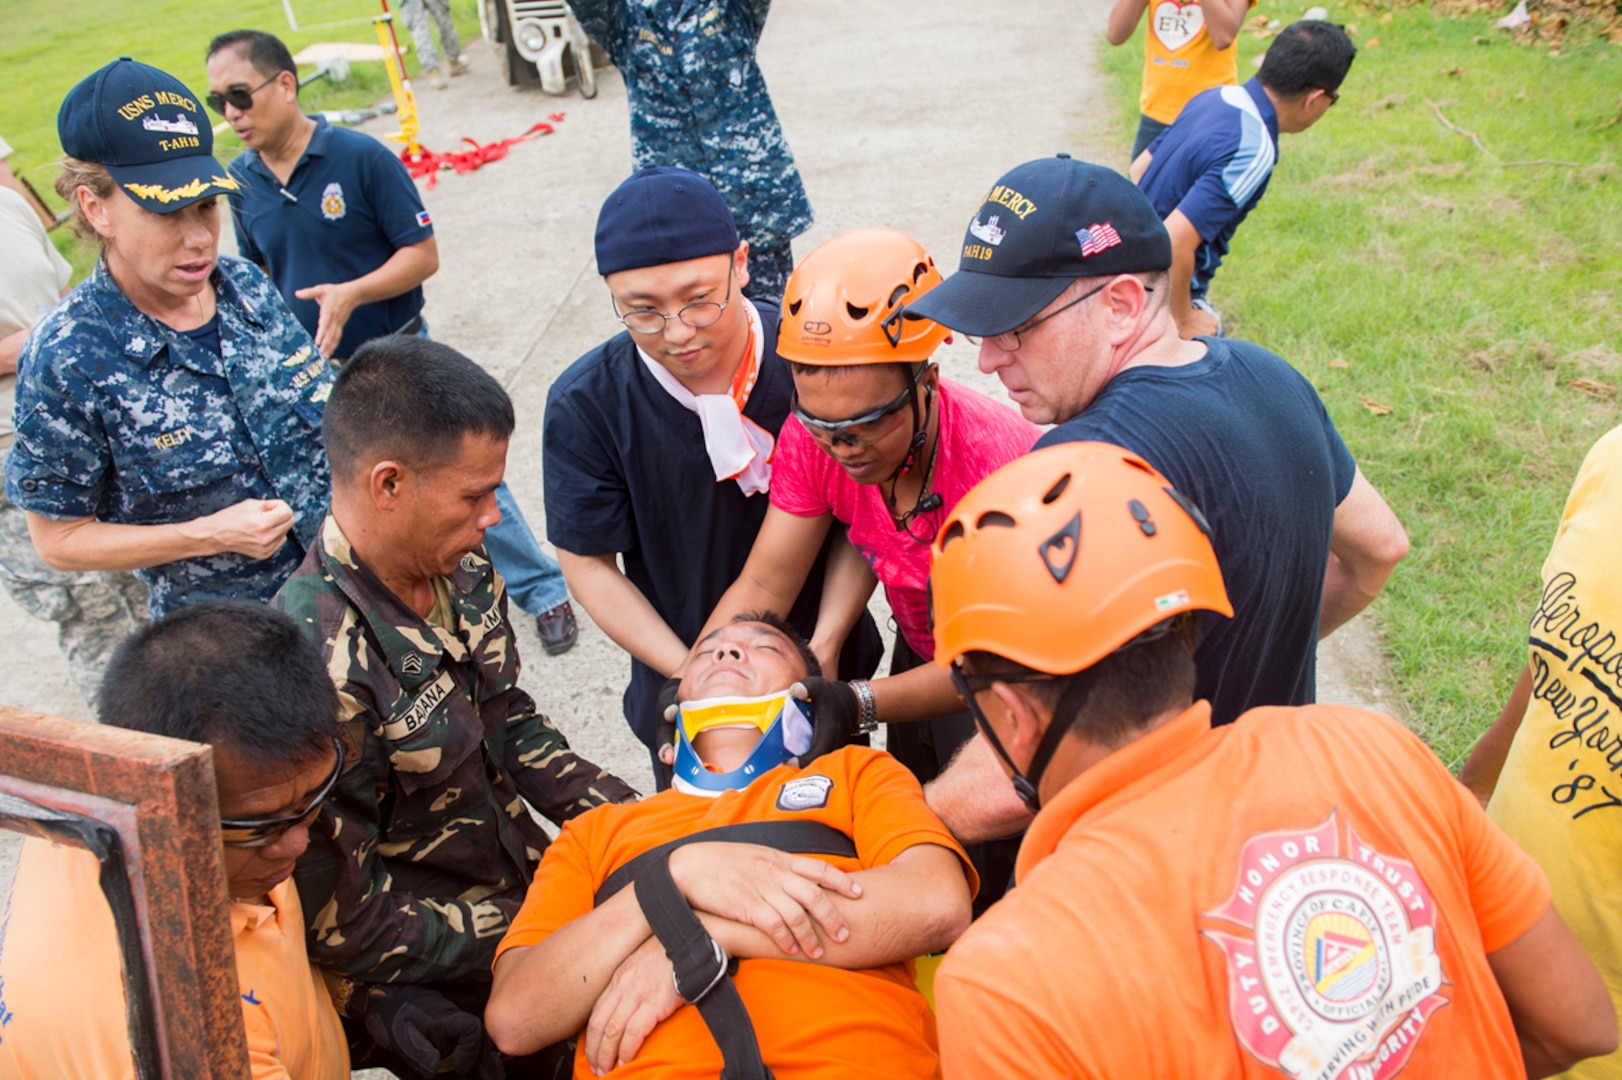 ROXAS CITY, Philippines (July 23, 2015)-  Filipino first responders, members of the Armed Forces of the Philippines and U.S. Navy and a Korean surgeon remove a simulated crash victim from a vehicle at Capiz National University. The training was part of a weeklong humanitarian assistance disaster relief symposium held in conjunction with the hospital ship USNS Mercy’s (T-AH 19) visit to the Philippines for Pacific Partnership 2015. Mercy is currently in the Philippines for its third mission port of PP15. Pacific Partnership is in its 10th iteration and is the largest annual multilateral humanitarian assistance and disaster relief preparedness mission conducted in the Indo-Asia-Pacific region. While training for crisis conditions, Pacific Partnership missions to date have provided real world medical care to approximately 270,000 patients and veterinary services to more than 38,999 animals. Additionally, the mission has provided critical infrastructure development to host nations through more than 180 engineering projects. 